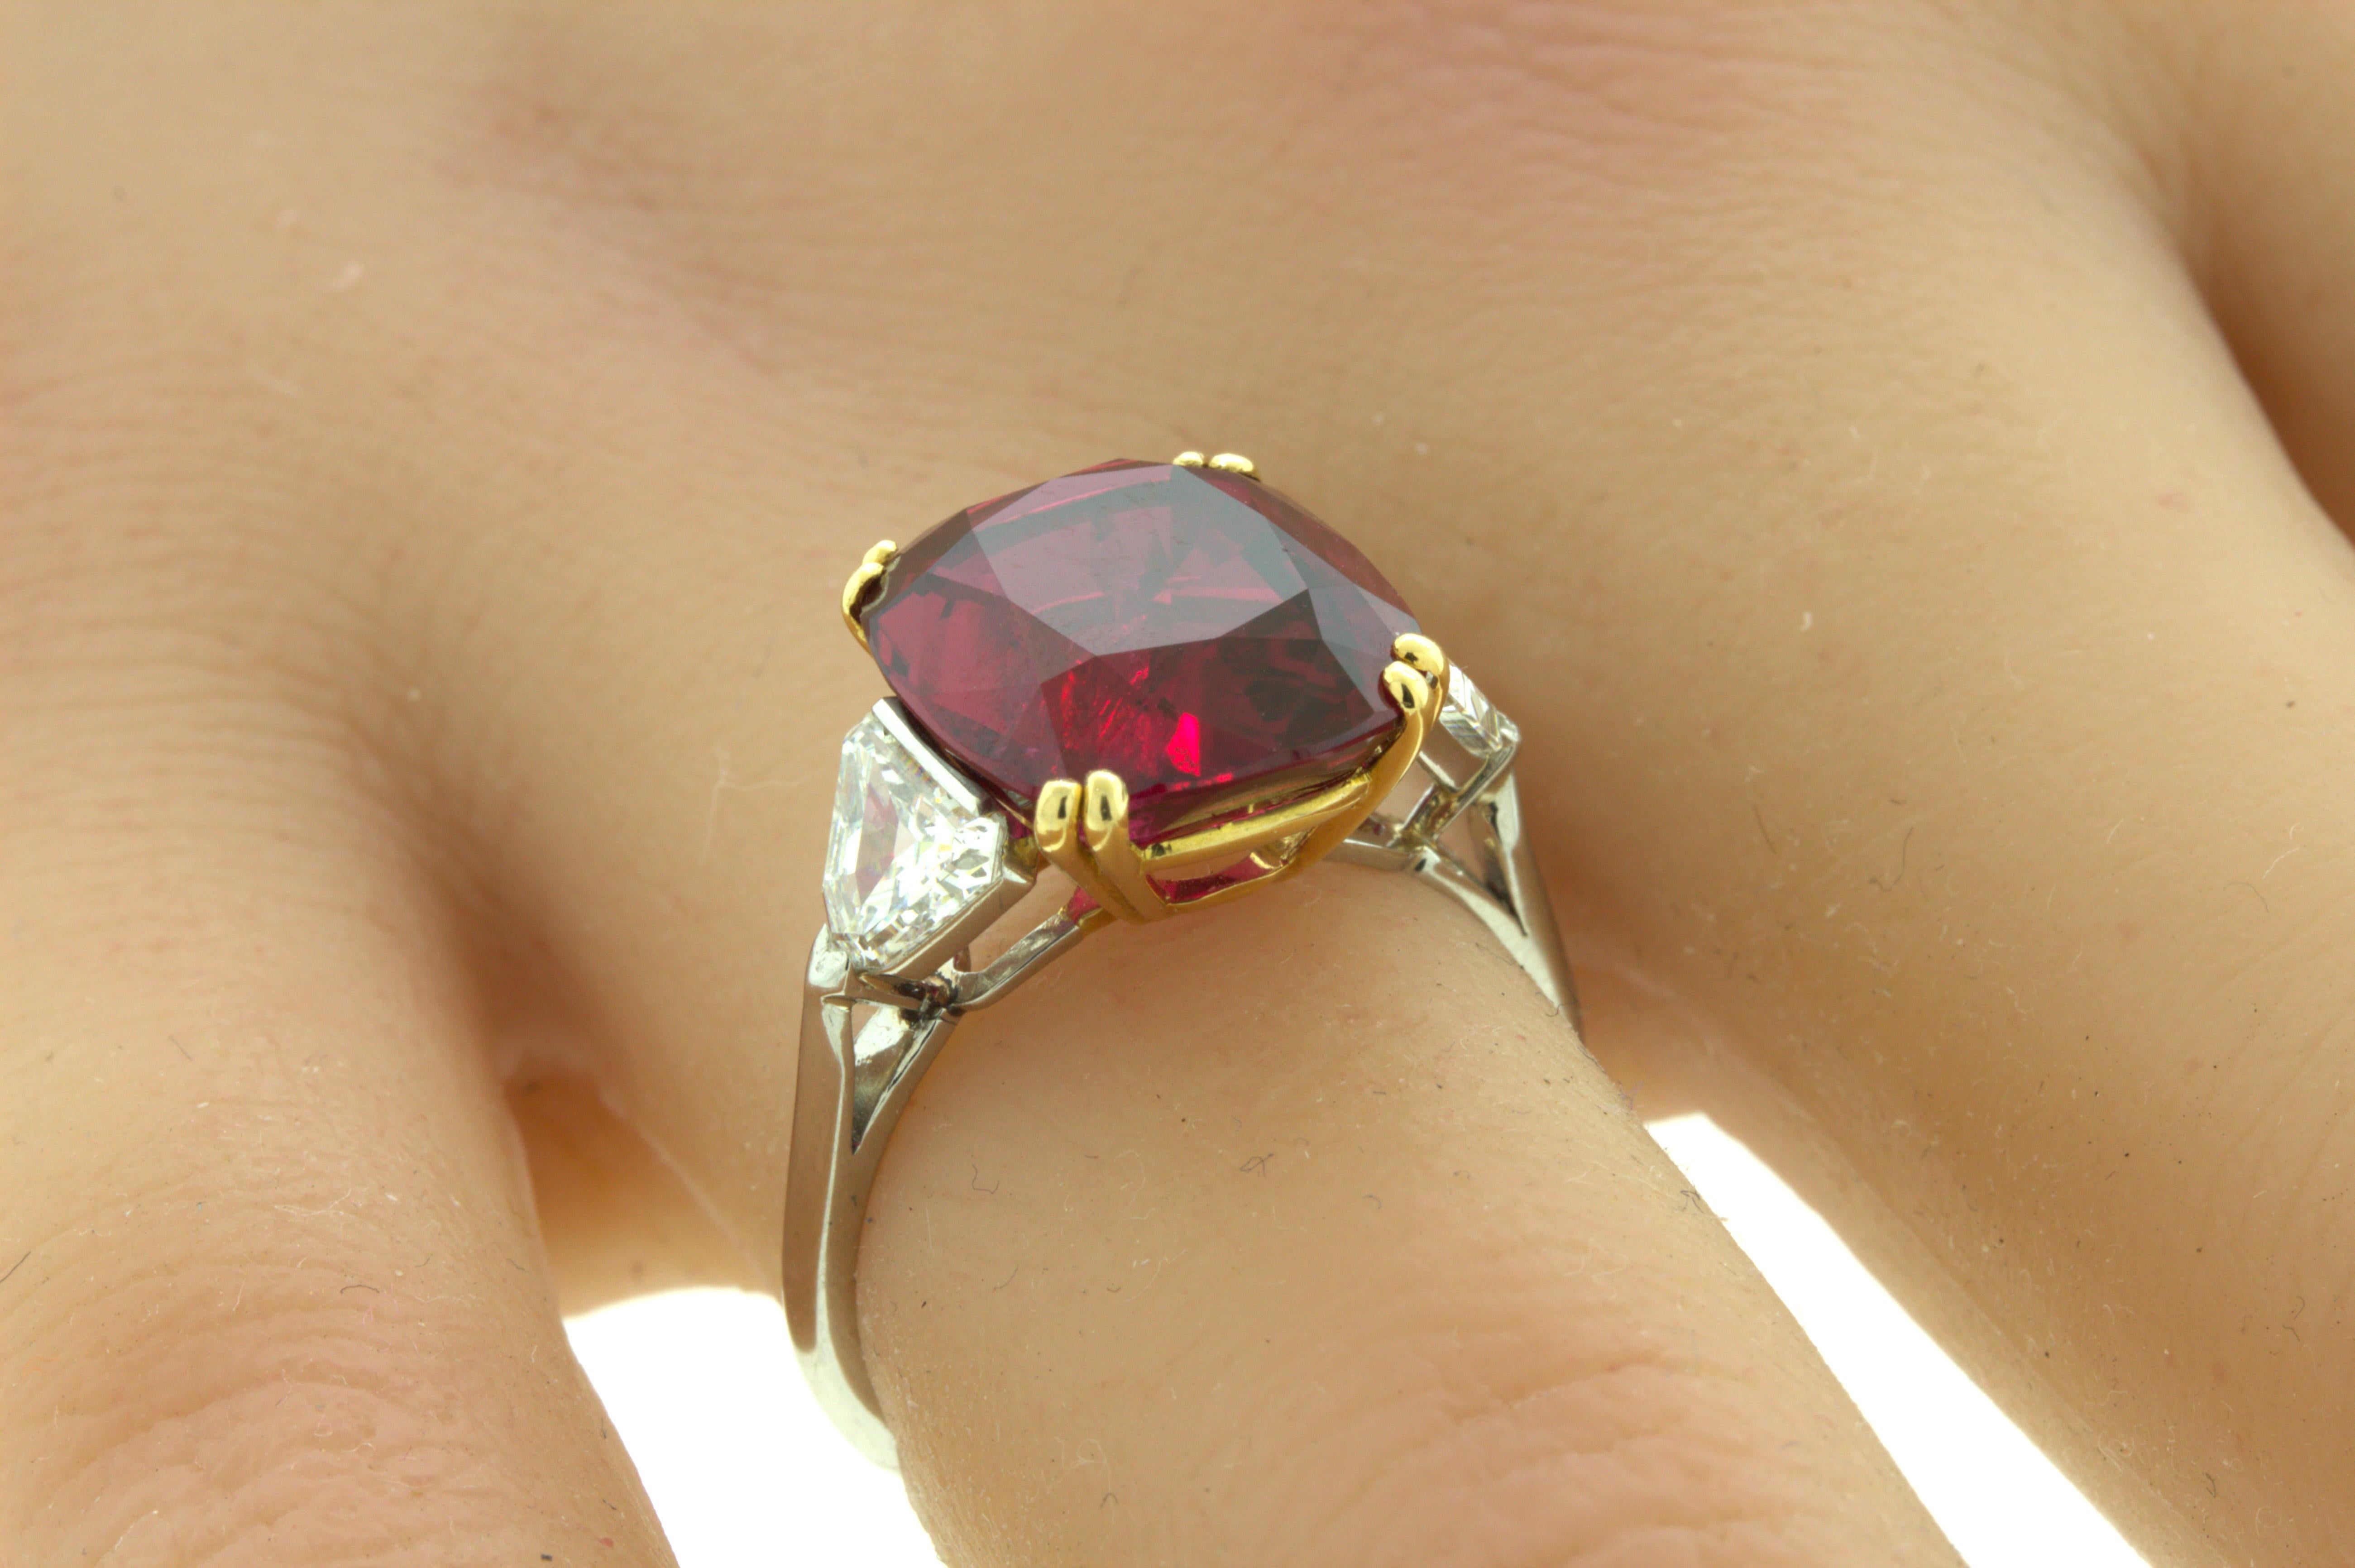 Magnificent Bvlgari 8.23 Carat Ruby Diamond Platinum & 18k Yellow Gold Ring, AGL In Excellent Condition For Sale In Beverly Hills, CA